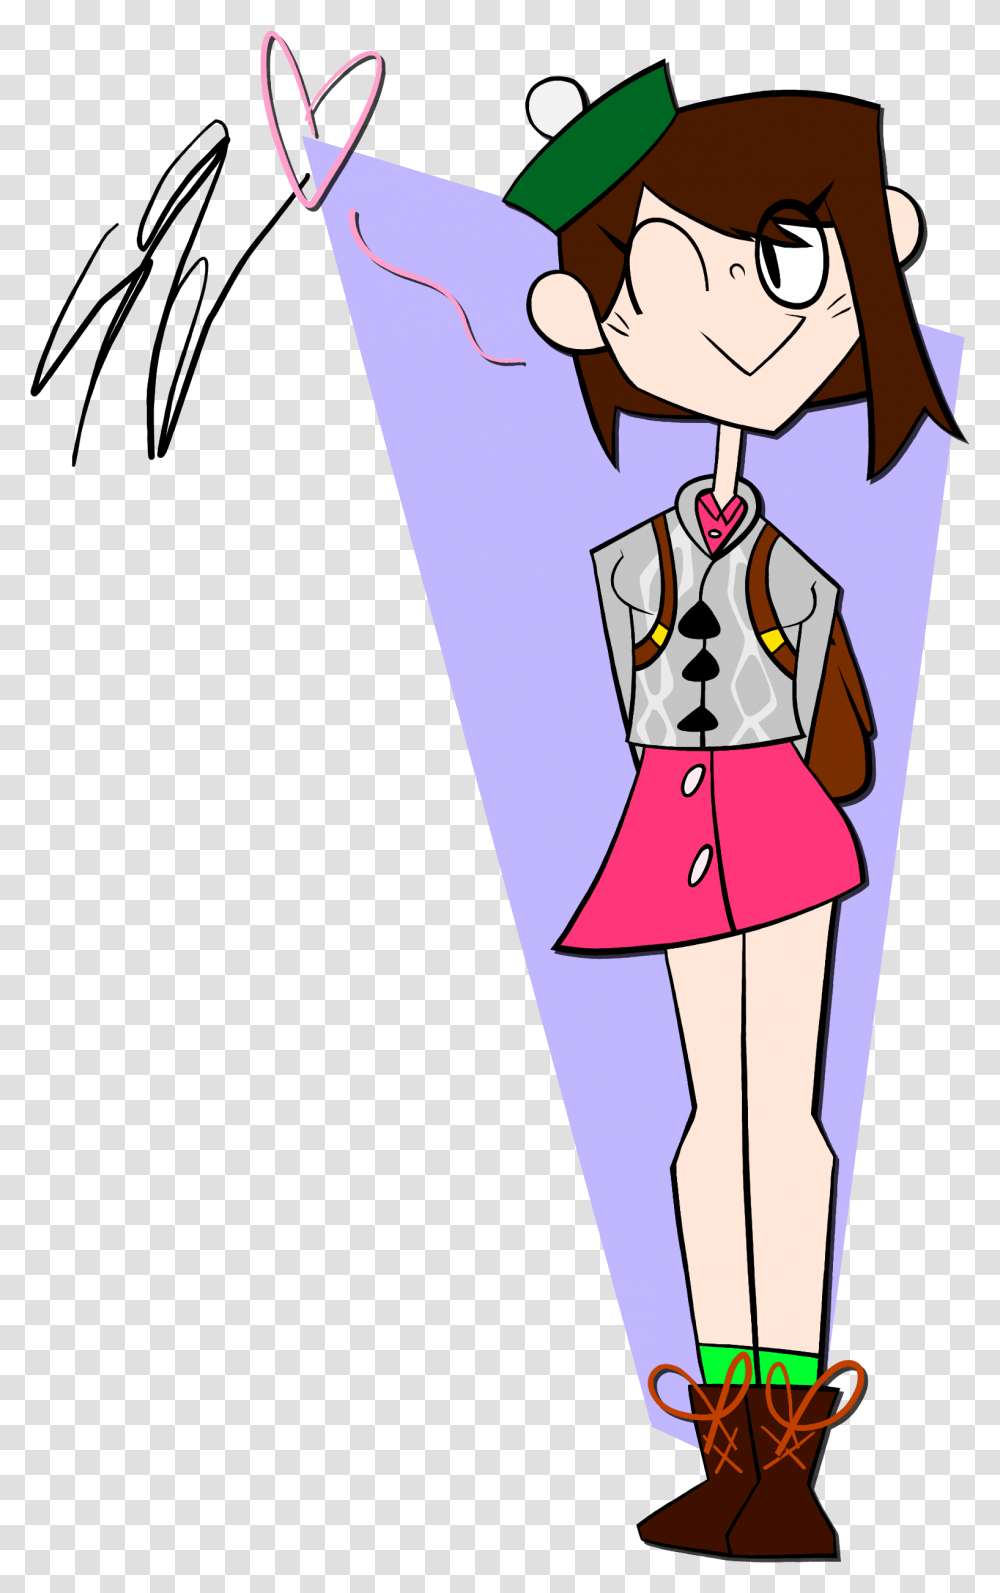 British Waifu By Haxored Cartoon, Performer, Tie, Accessories, Clothing Transparent Png